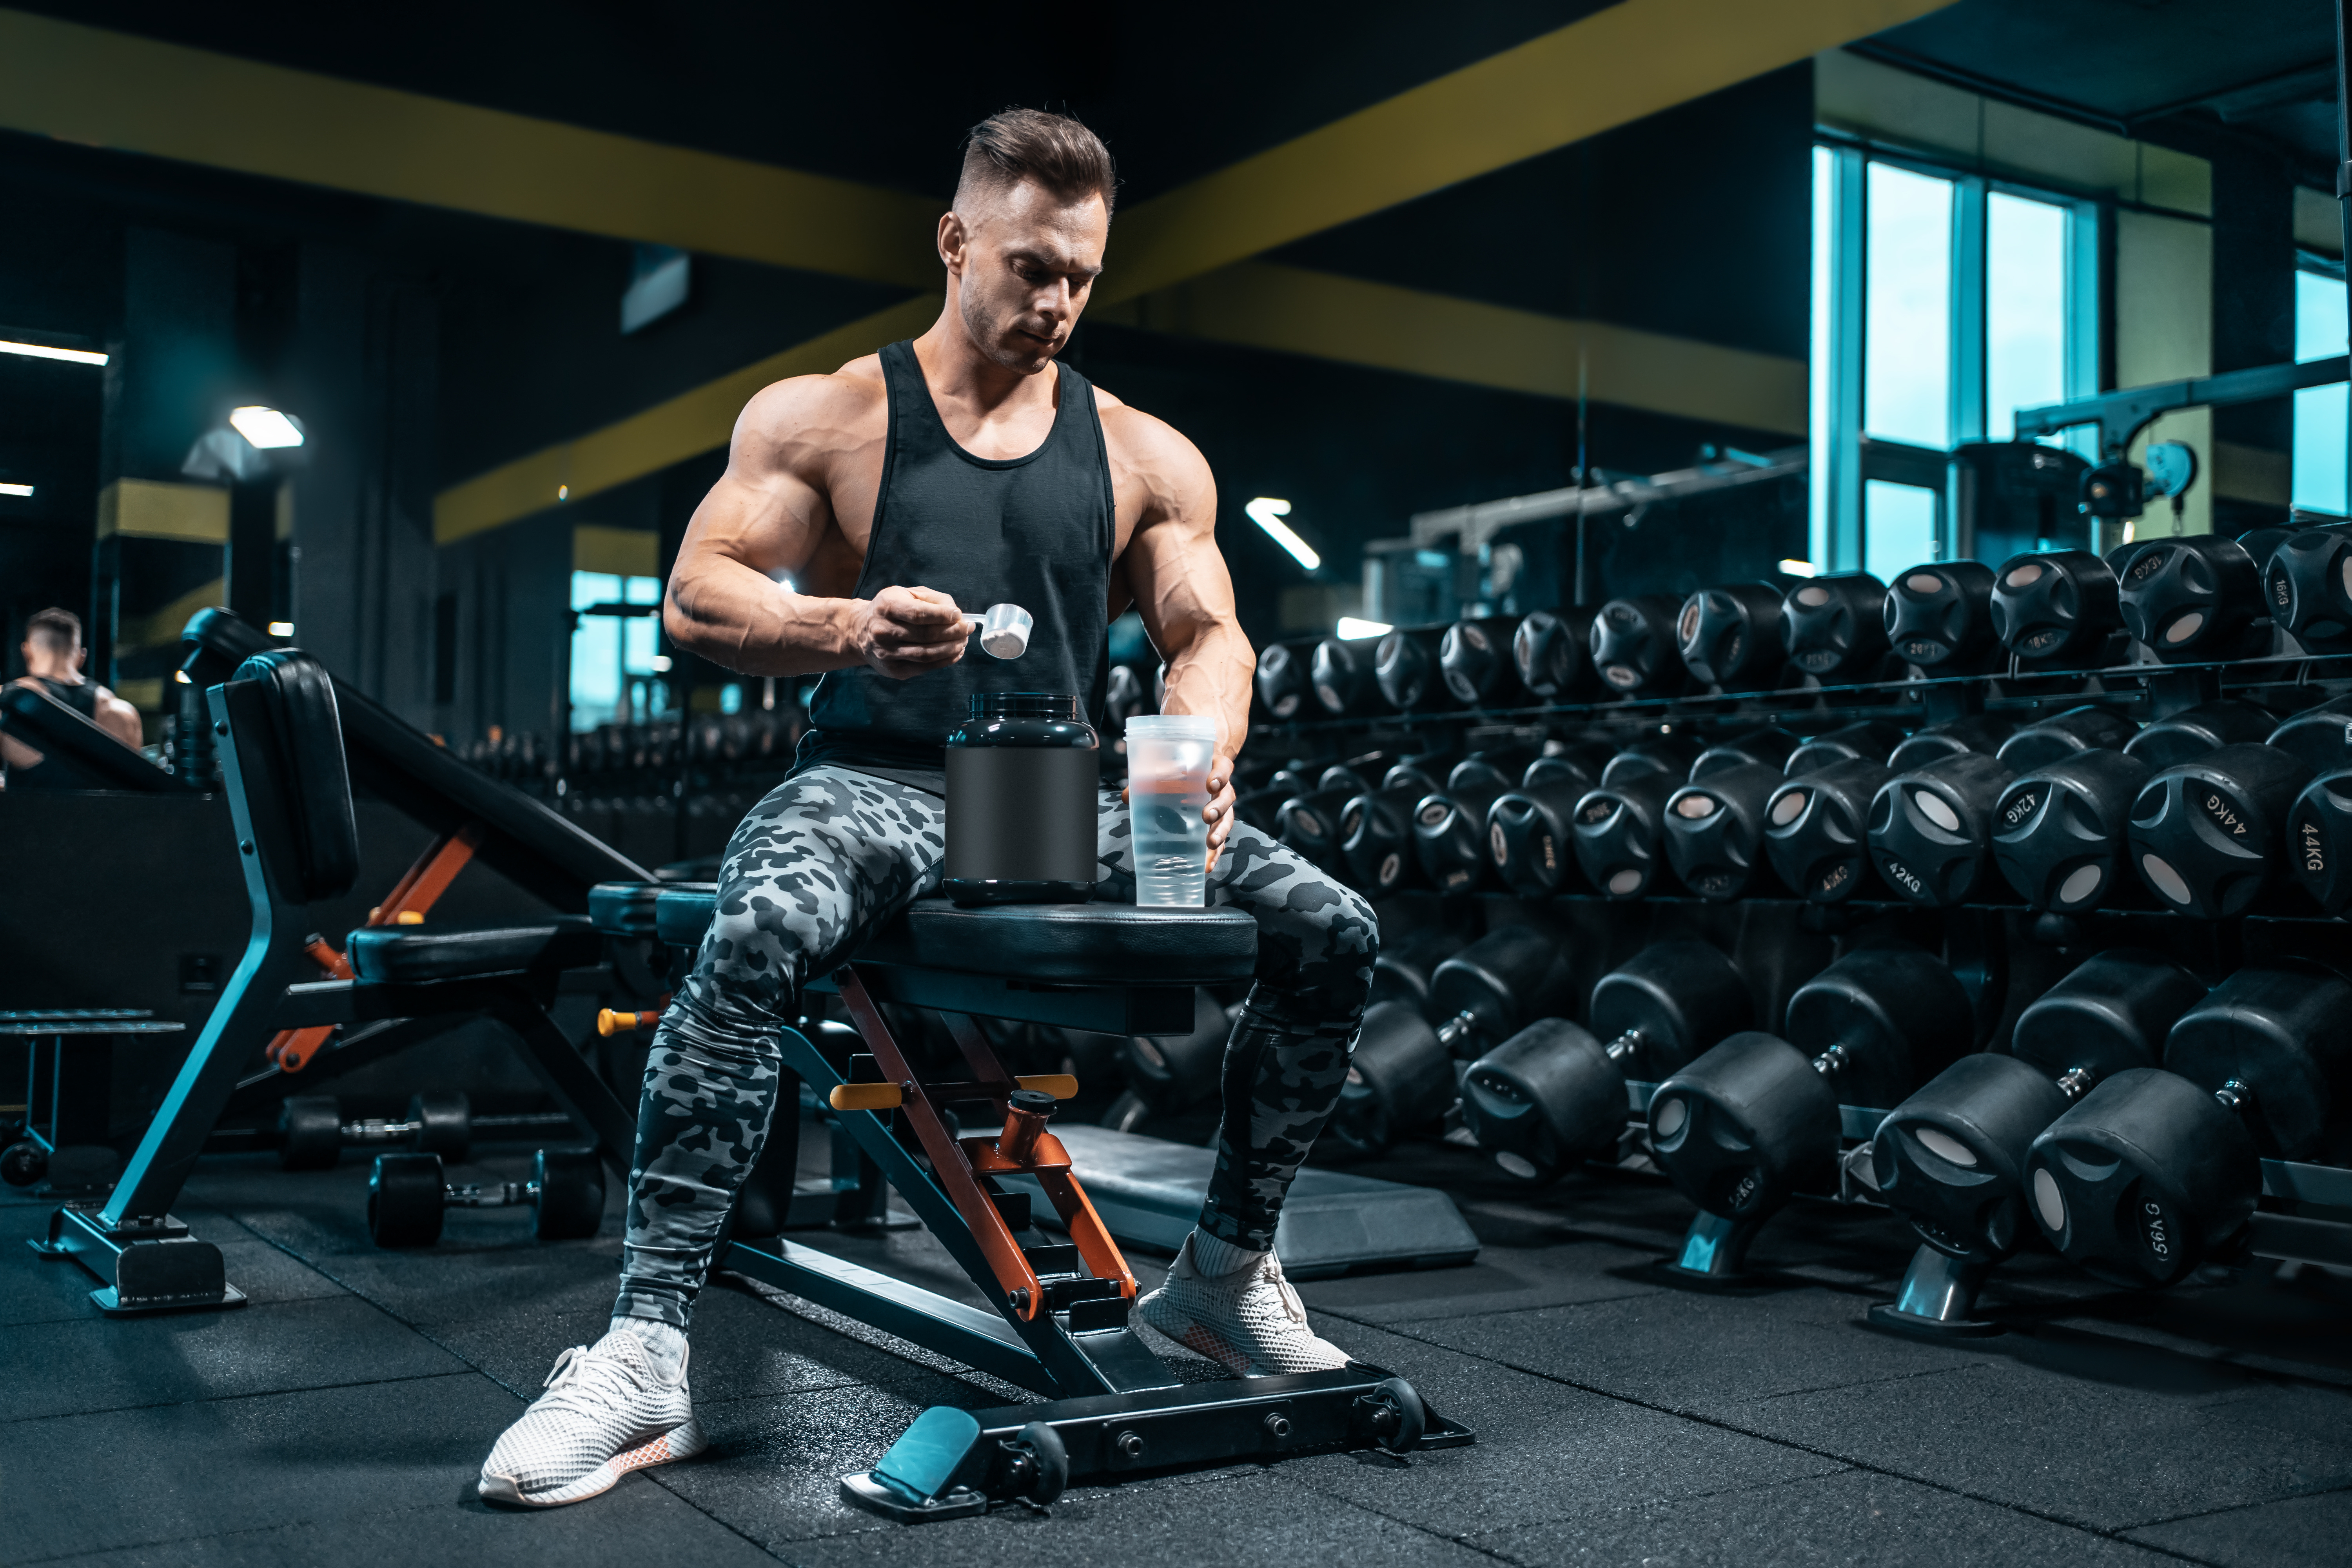 bcaa vs protein: preparing protein drink at the gym